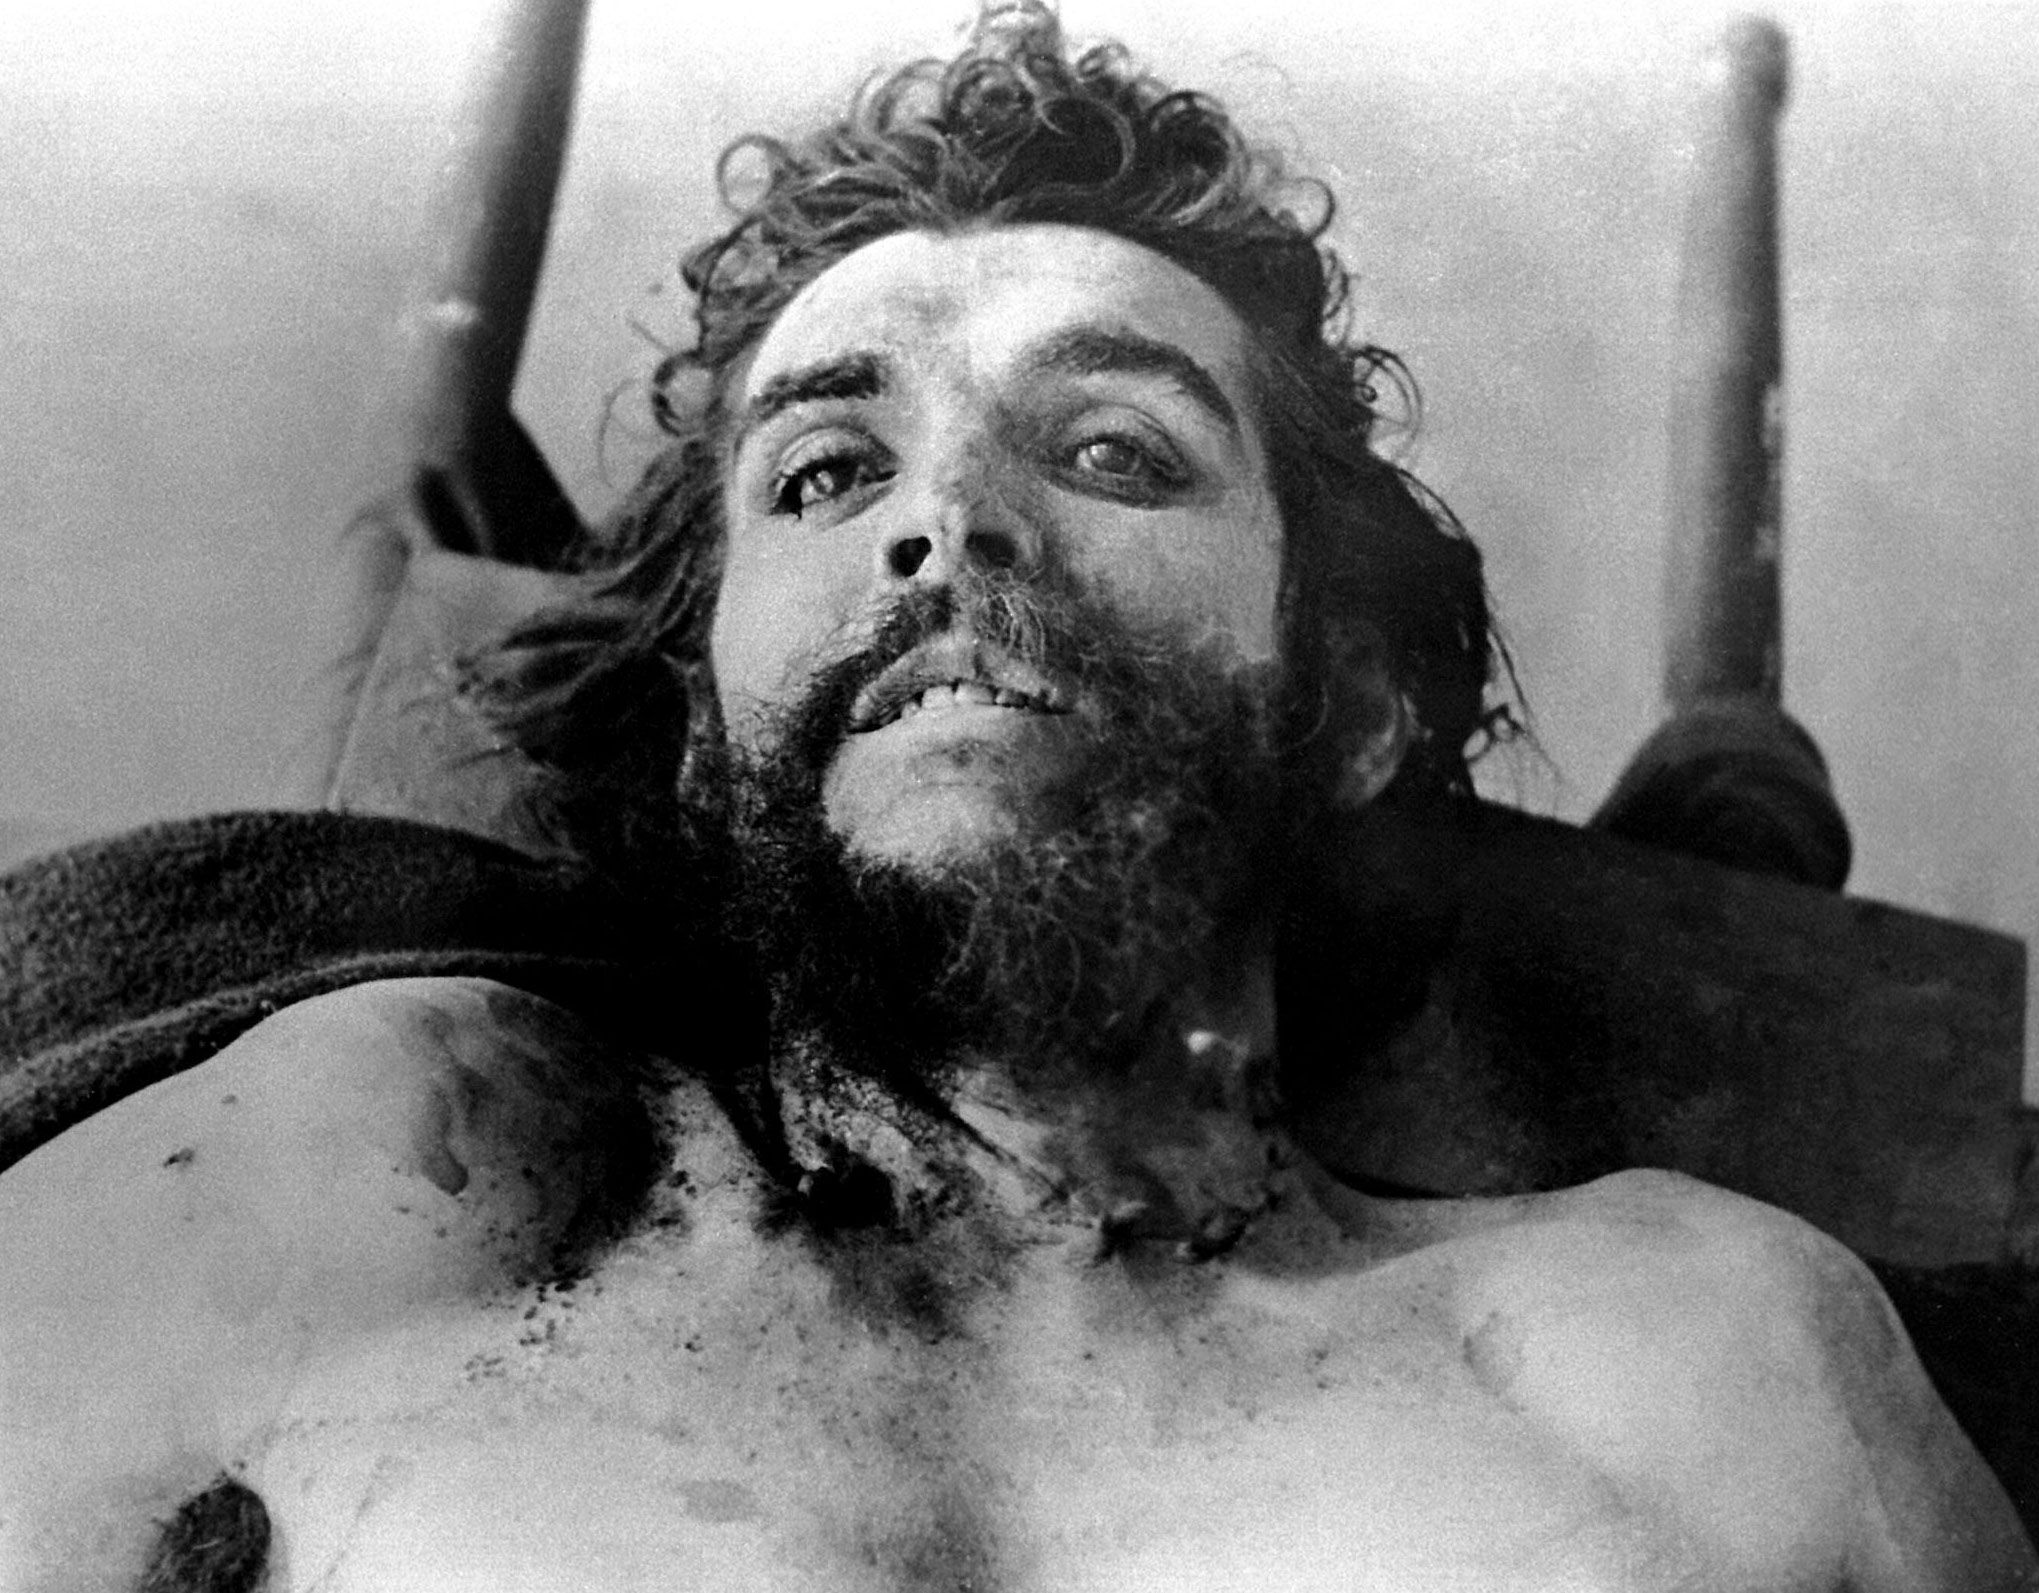 The Death of Che Guevara Declassified